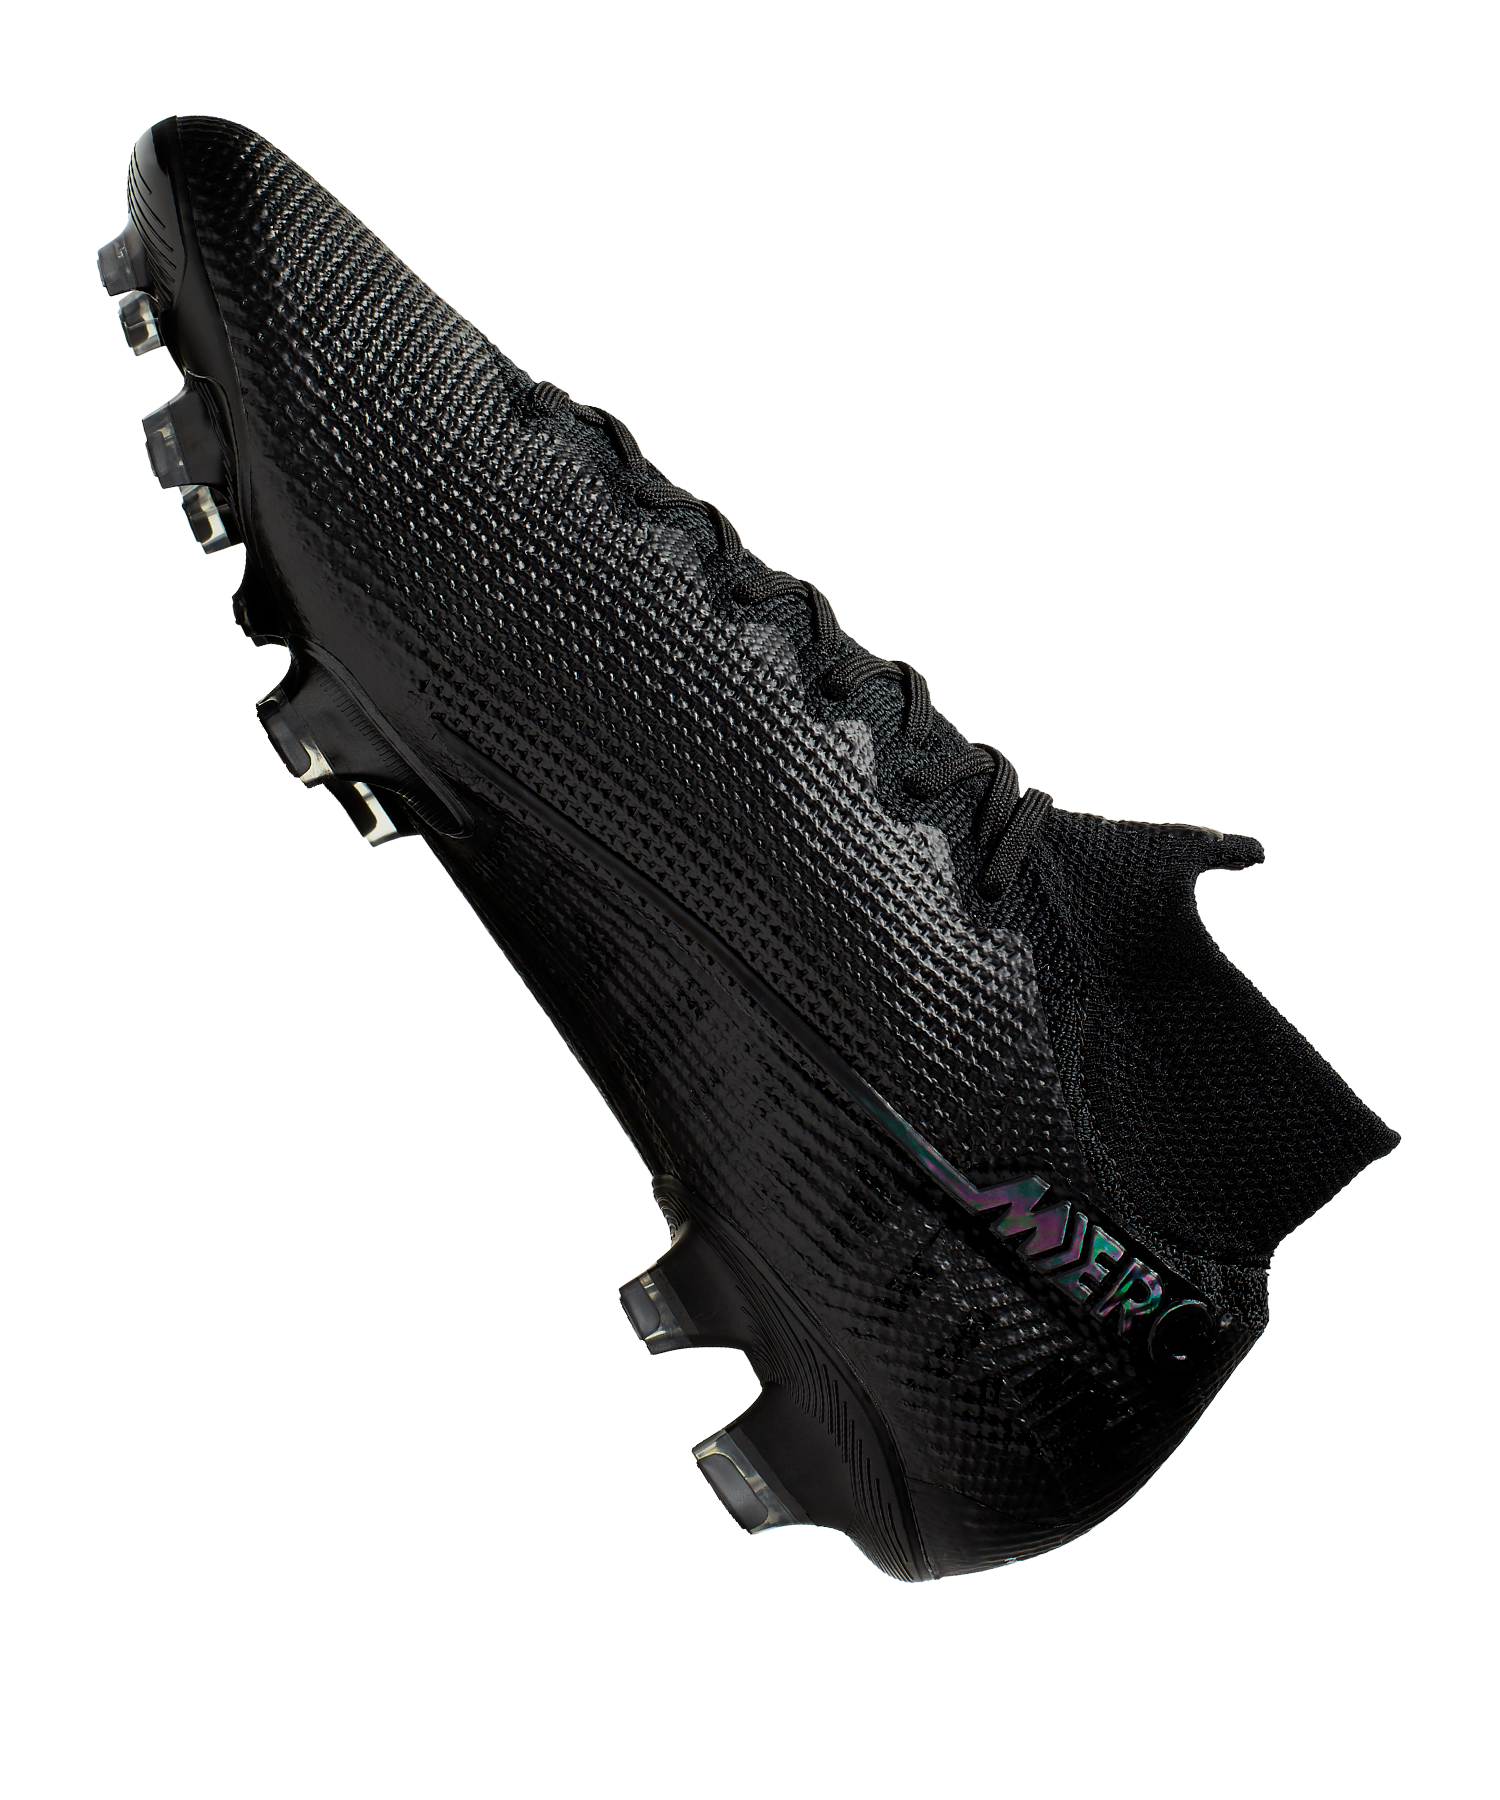 Nike Mercurial Superfly 360 Elite LVL UP SE FG Firm Ground